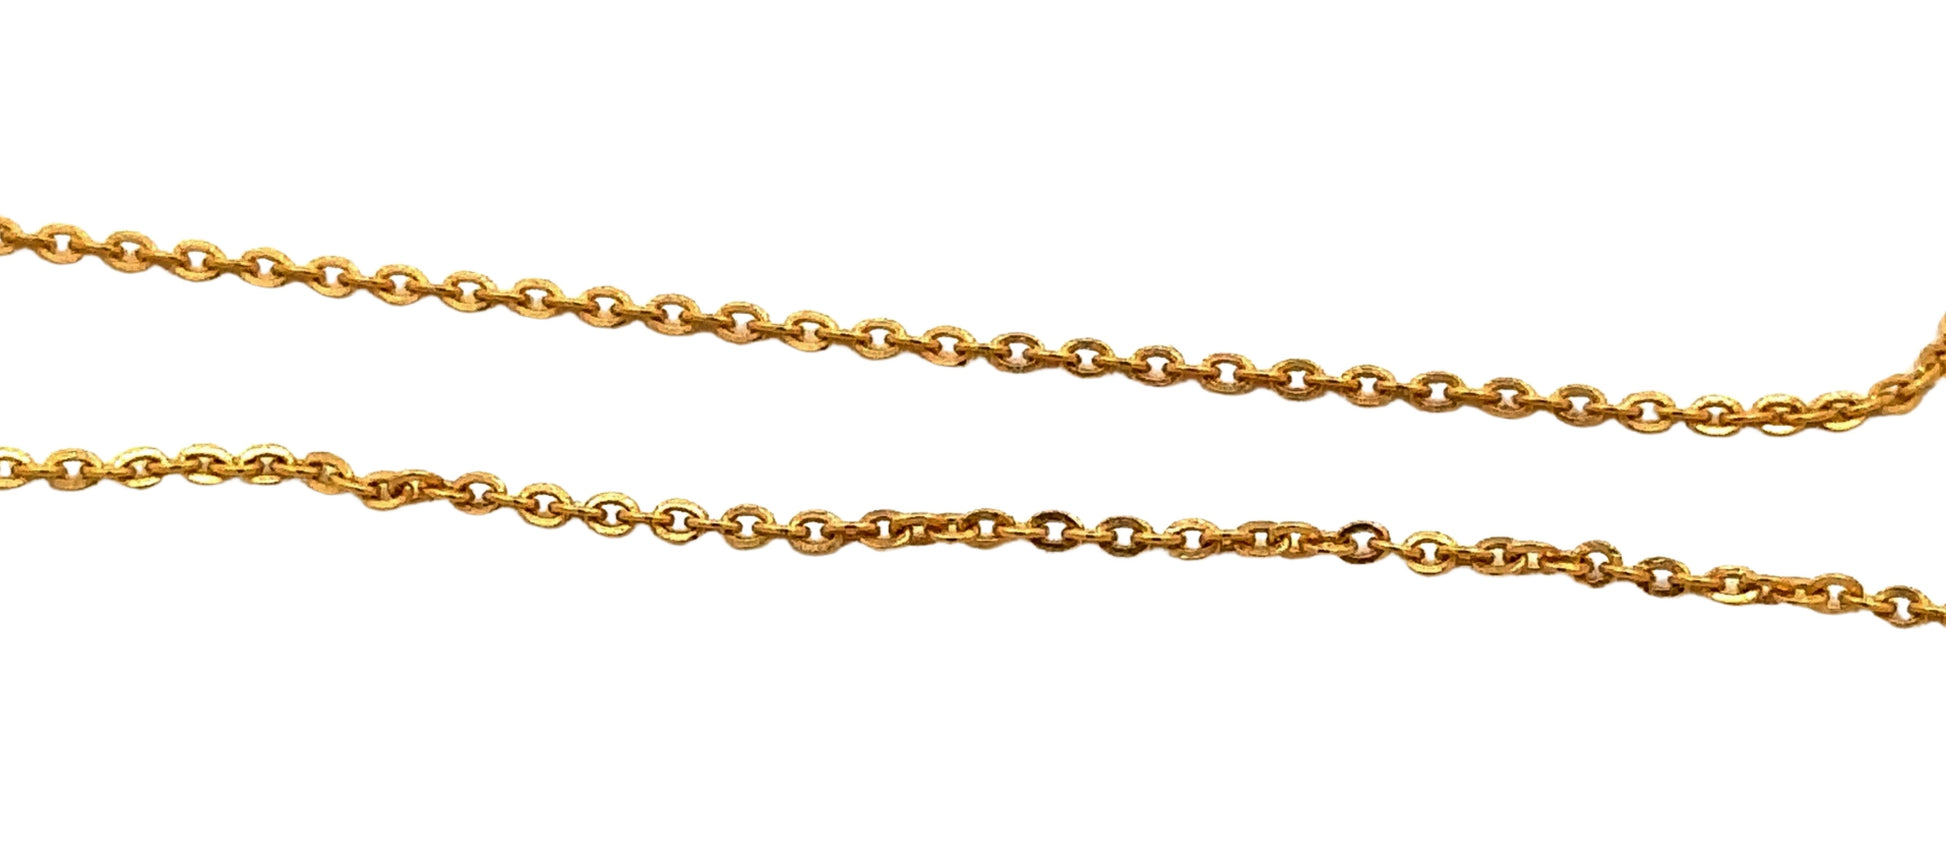 close up of 22k yellow gold link chain